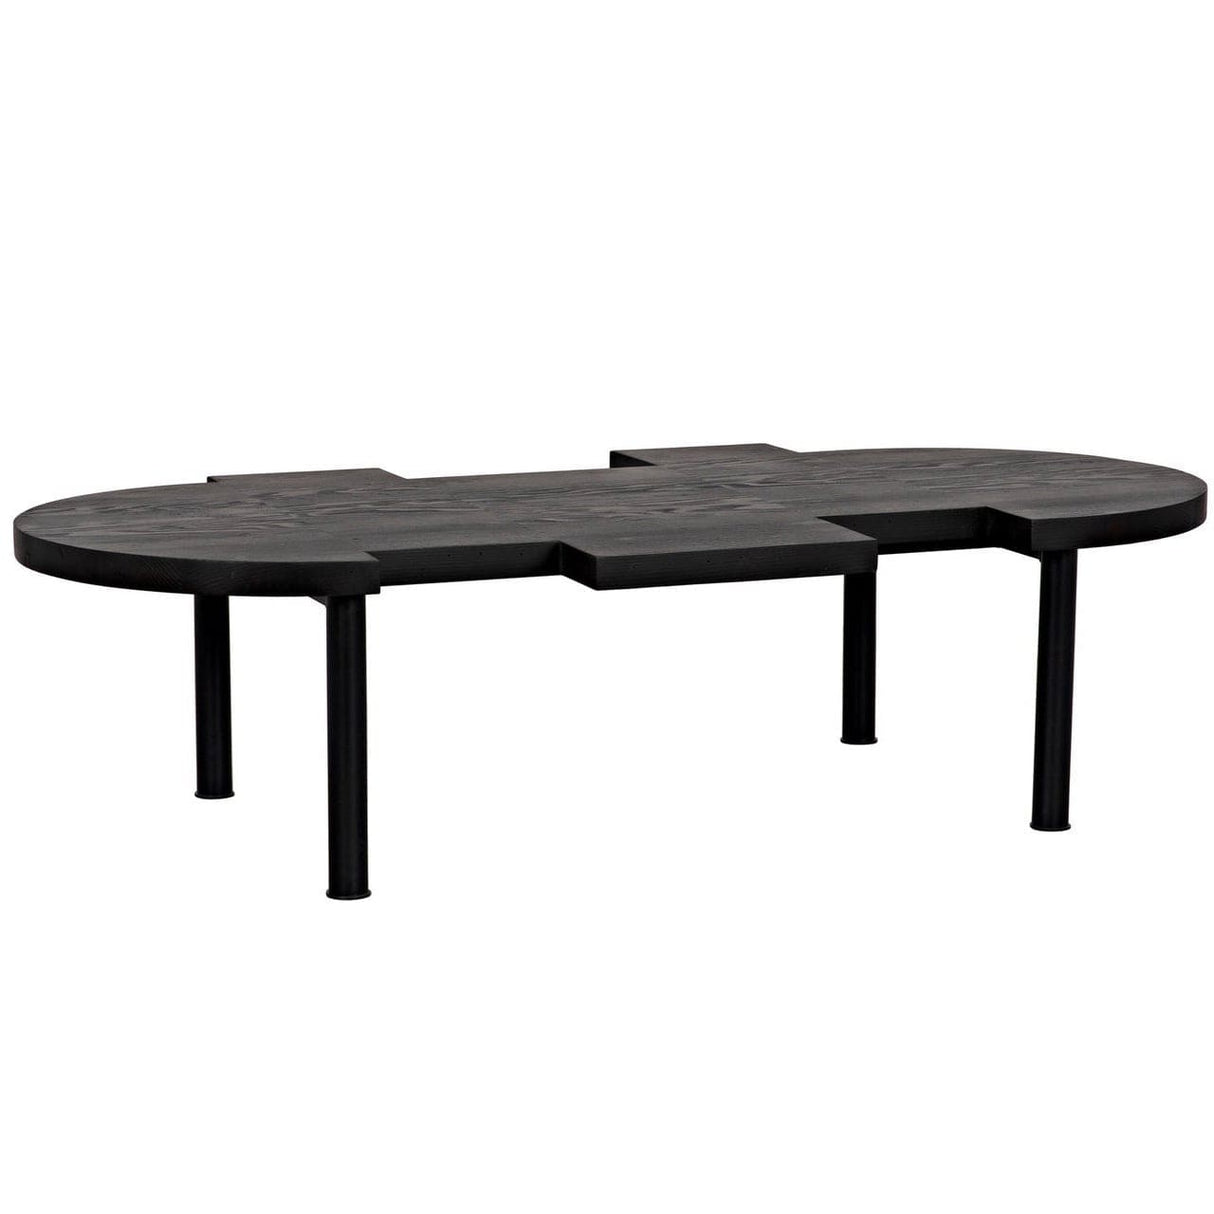 CFC Puzzle Coffee Table - HOLD FOR PRICING Coffee Tables